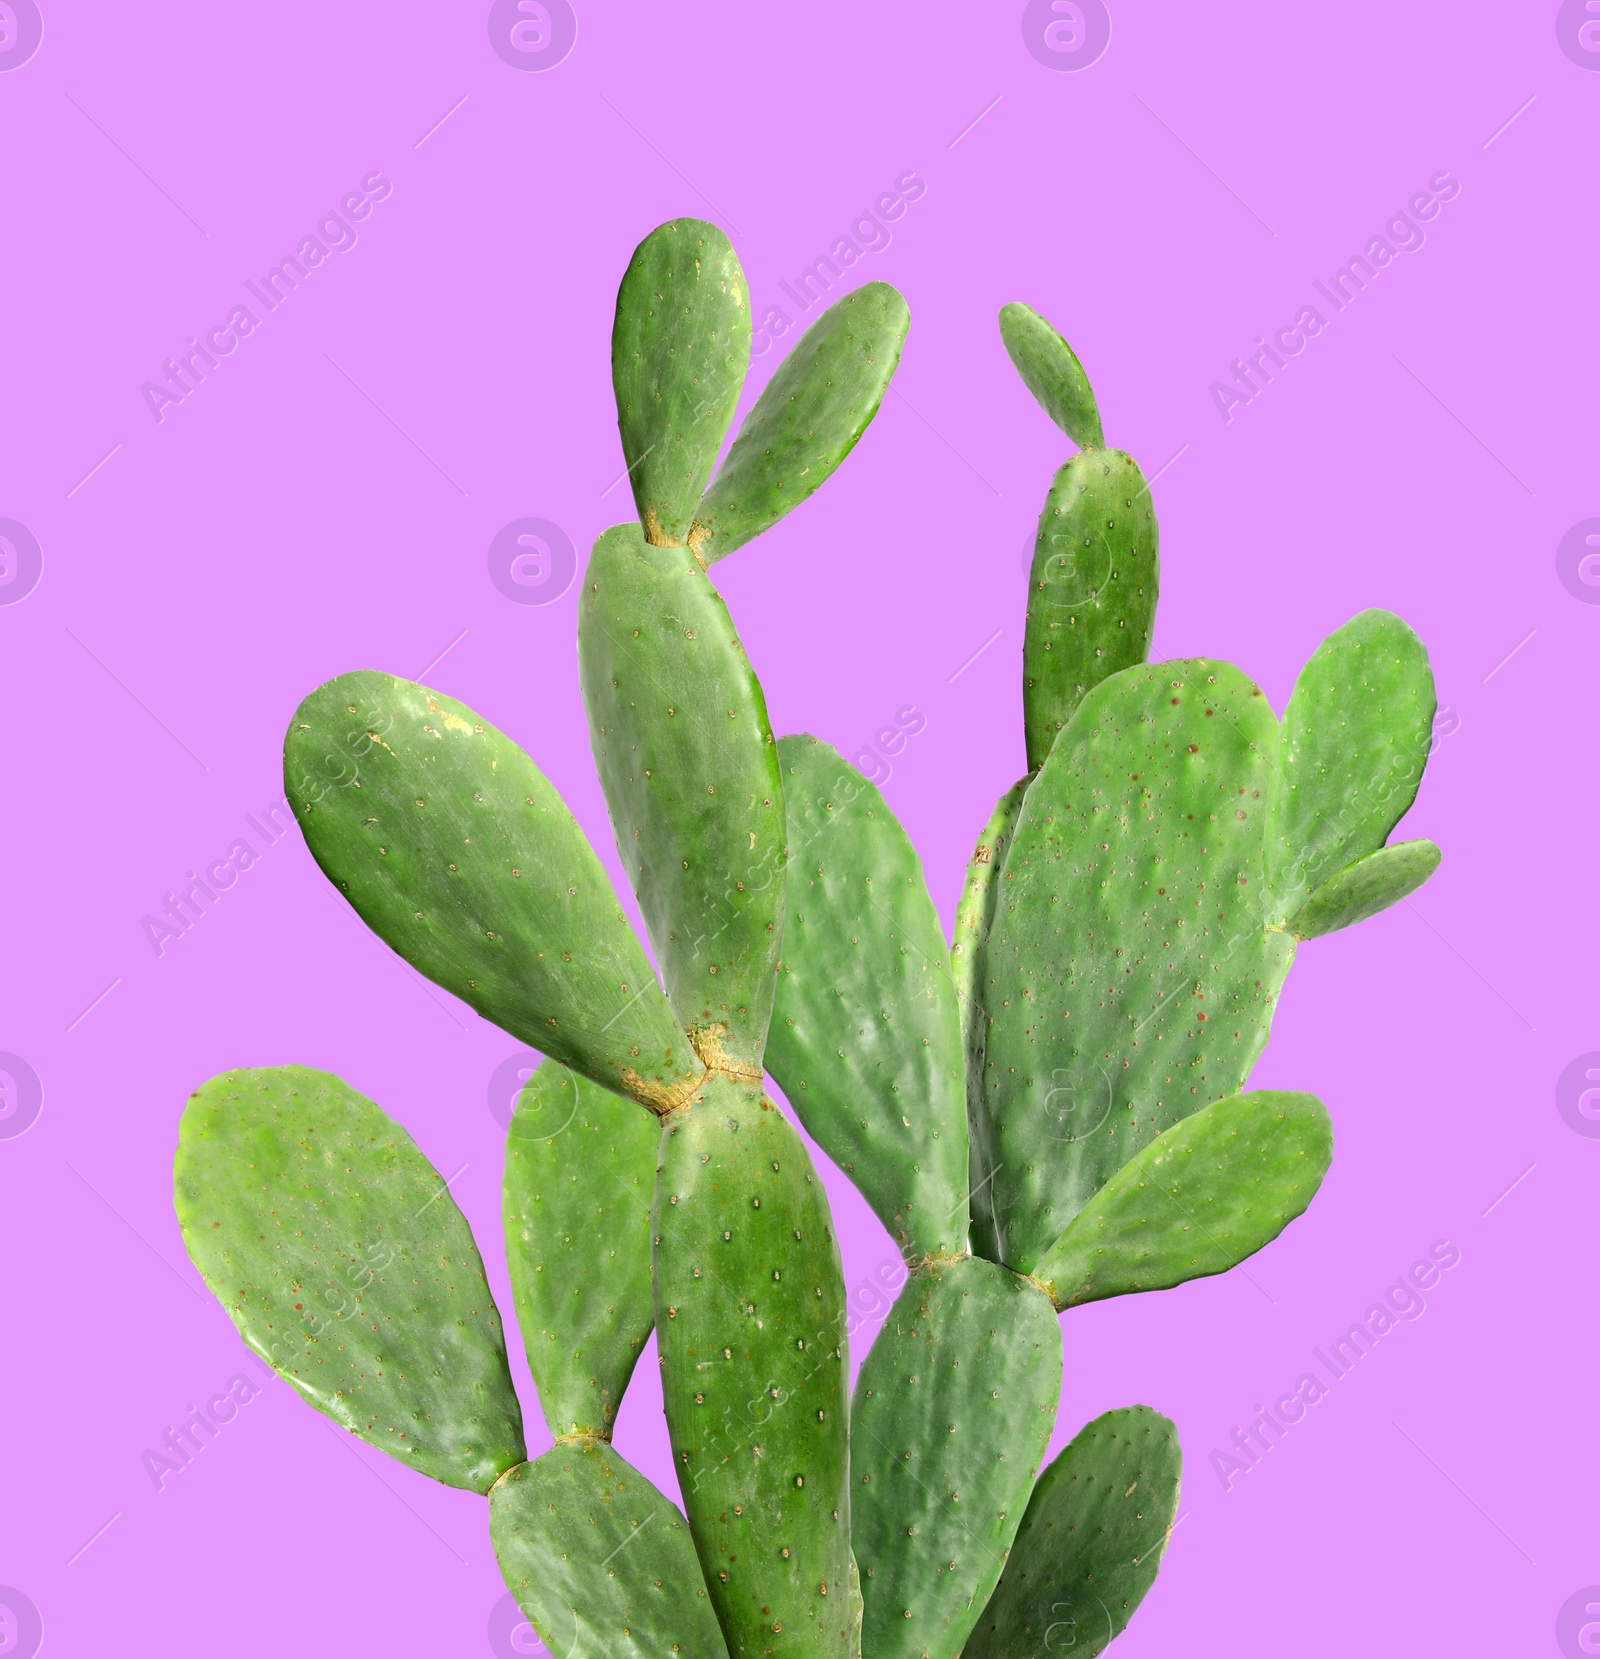 Image of Beautiful green cactus plant on violet background